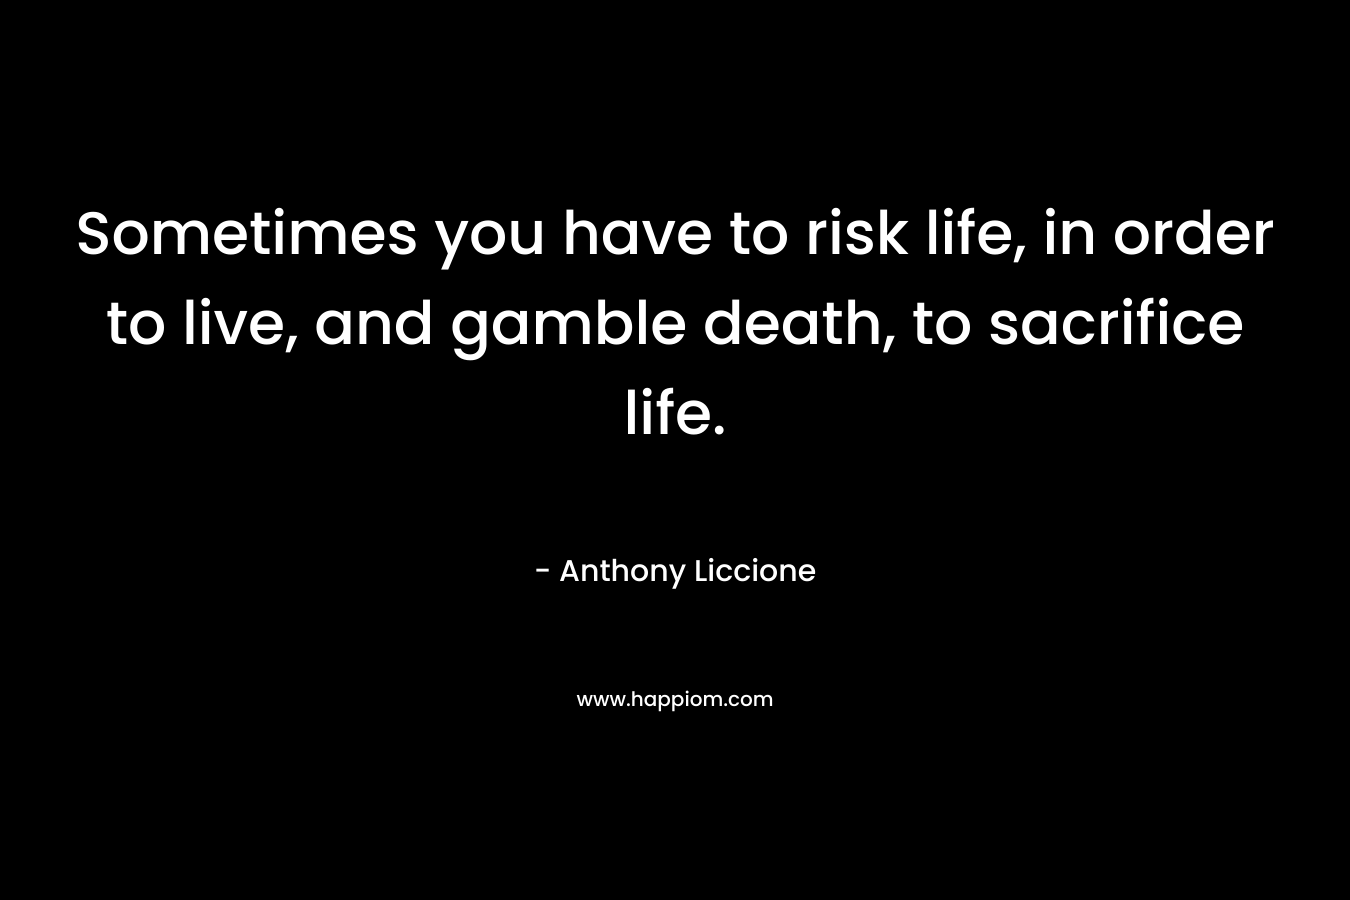 Sometimes you have to risk life, in order to live, and gamble death, to sacrifice life. – Anthony Liccione